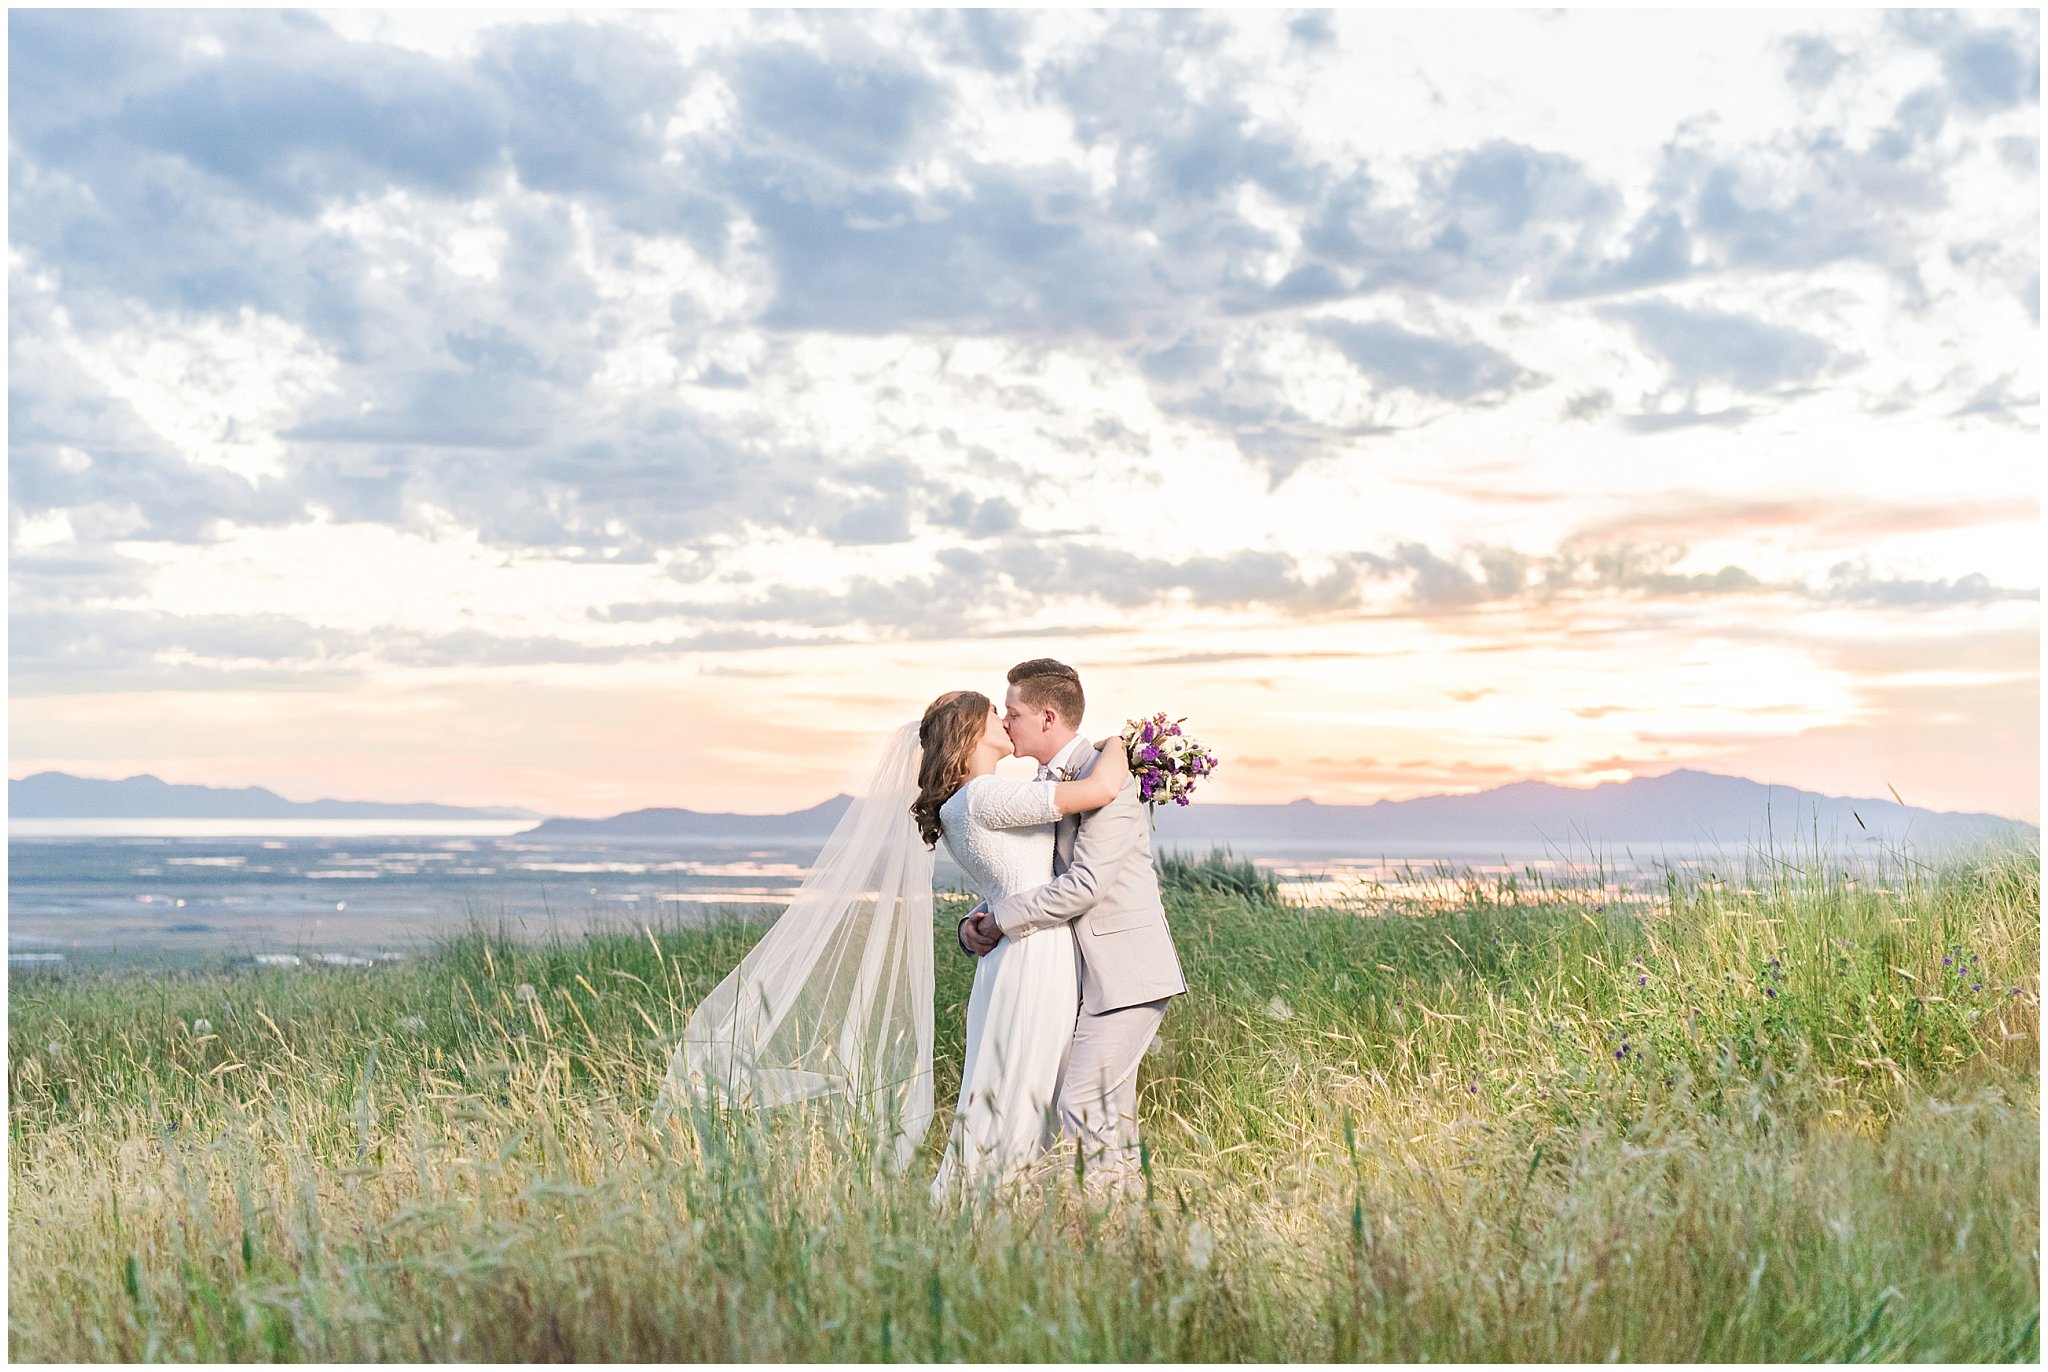 Bride and groom kiss above Salt Lake City with incredible sunset behind them | Top Utah Wedding and Couples Photos 2019 | Jessie and Dallin Photography